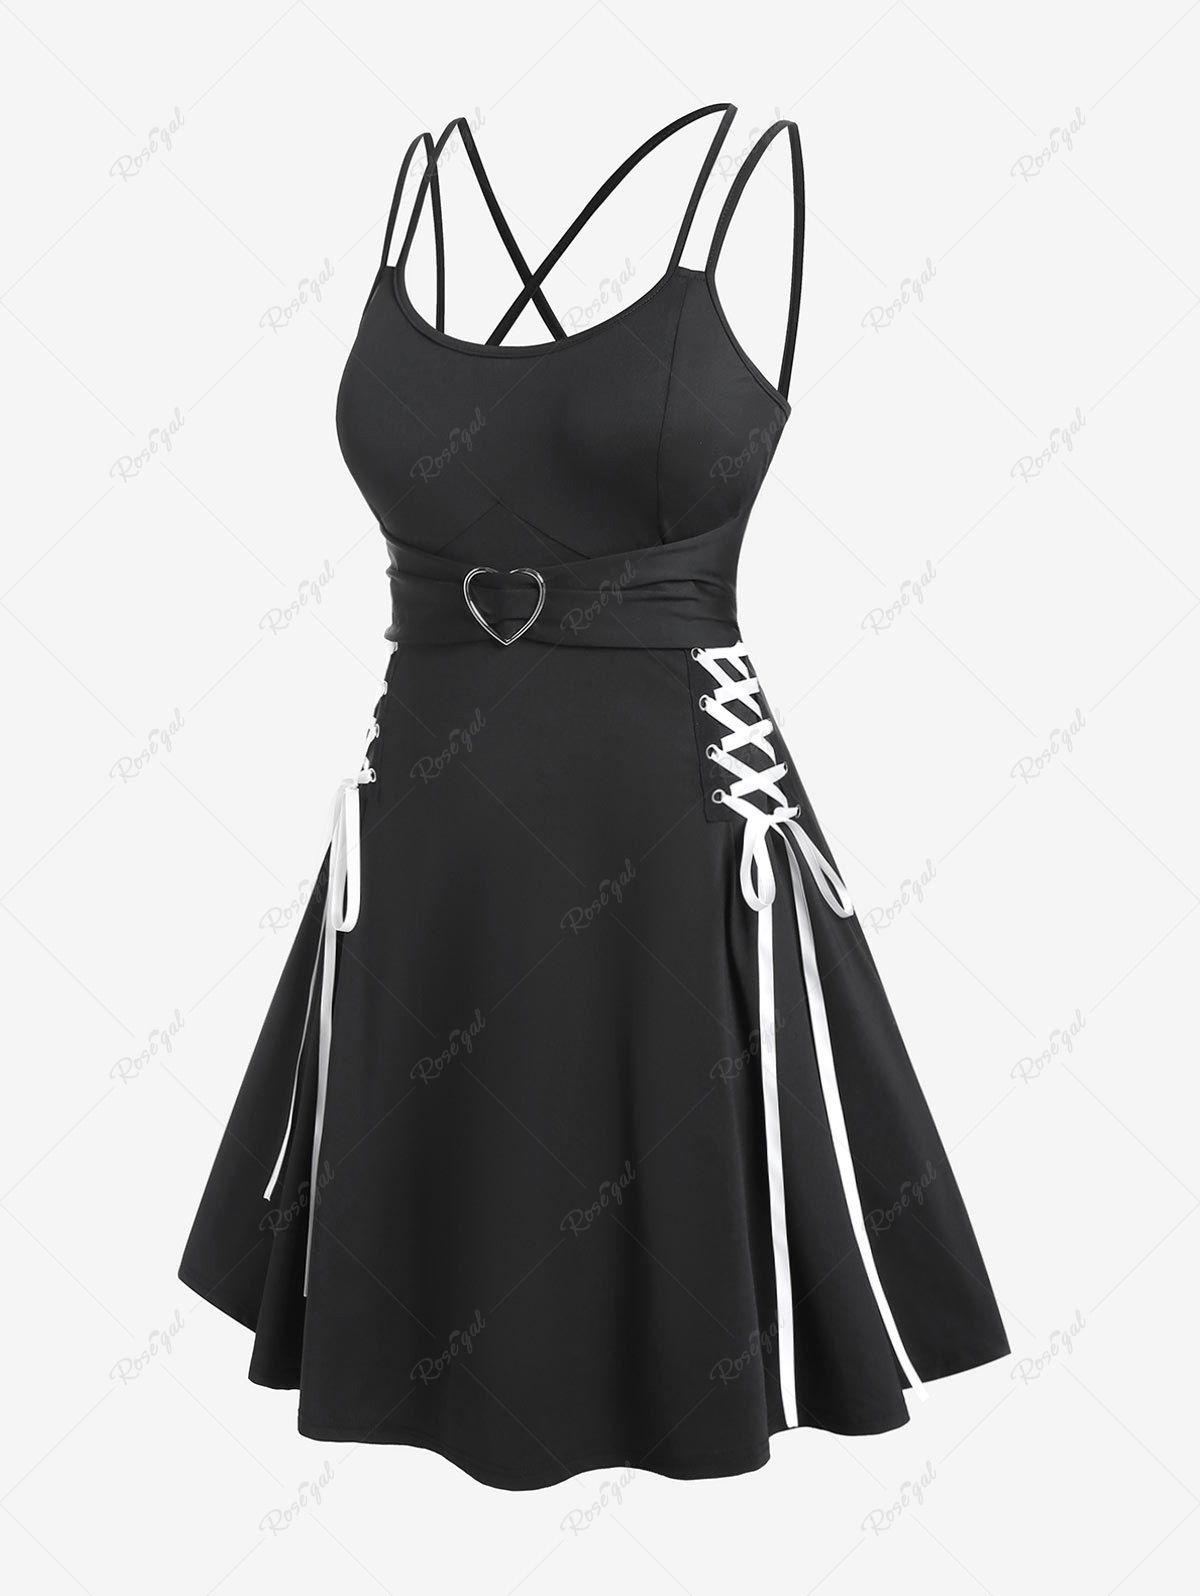 Discount Plus Size Lace Up Backless High Waisted A Line Gothic Dress  